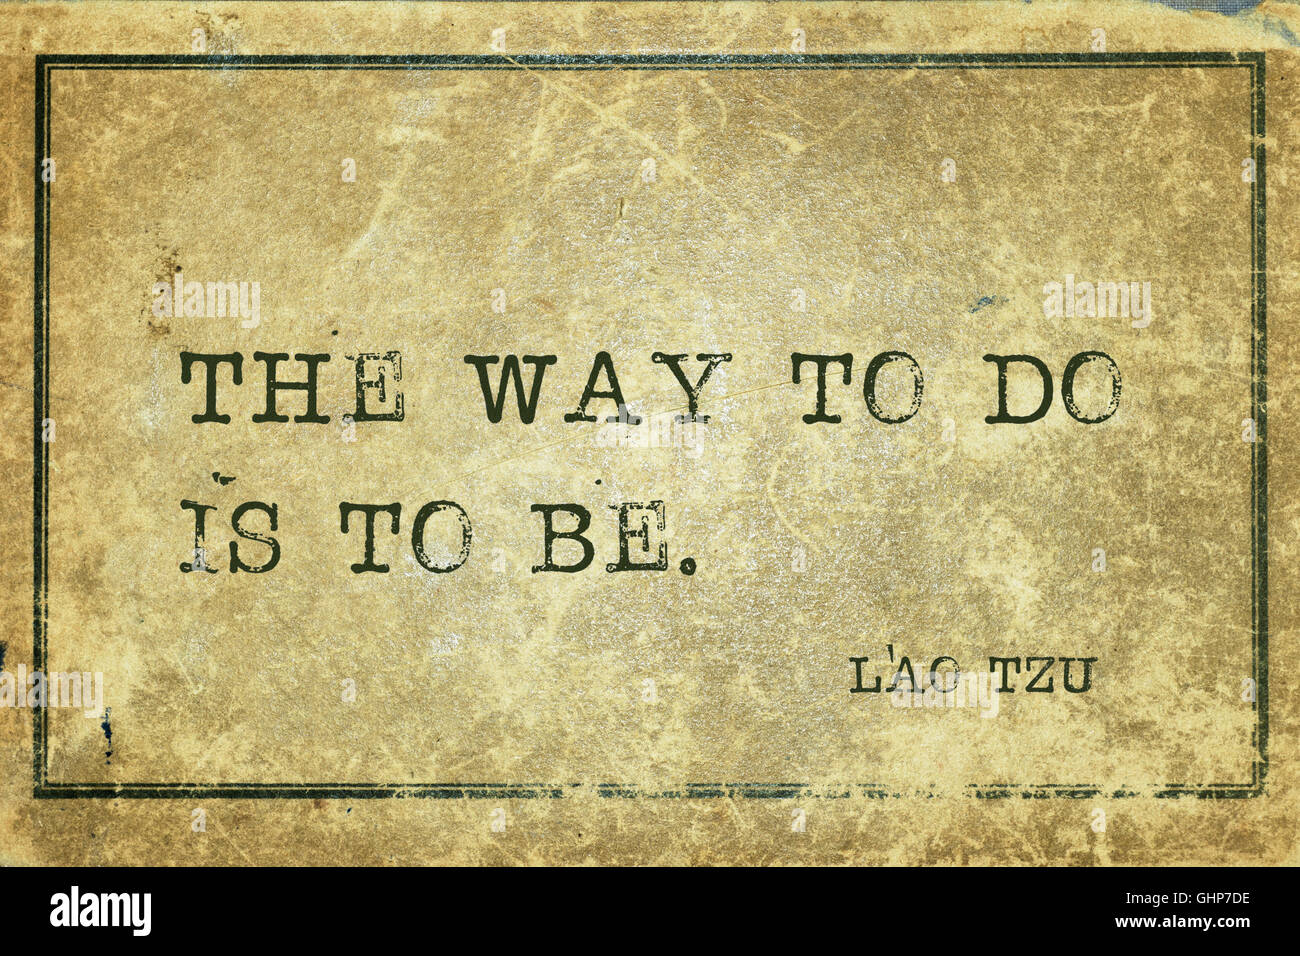 The Way to do is to be - ancient Chinese philosopher Lao Tzu quote printed on grunge vintage cardboard Stock Photo